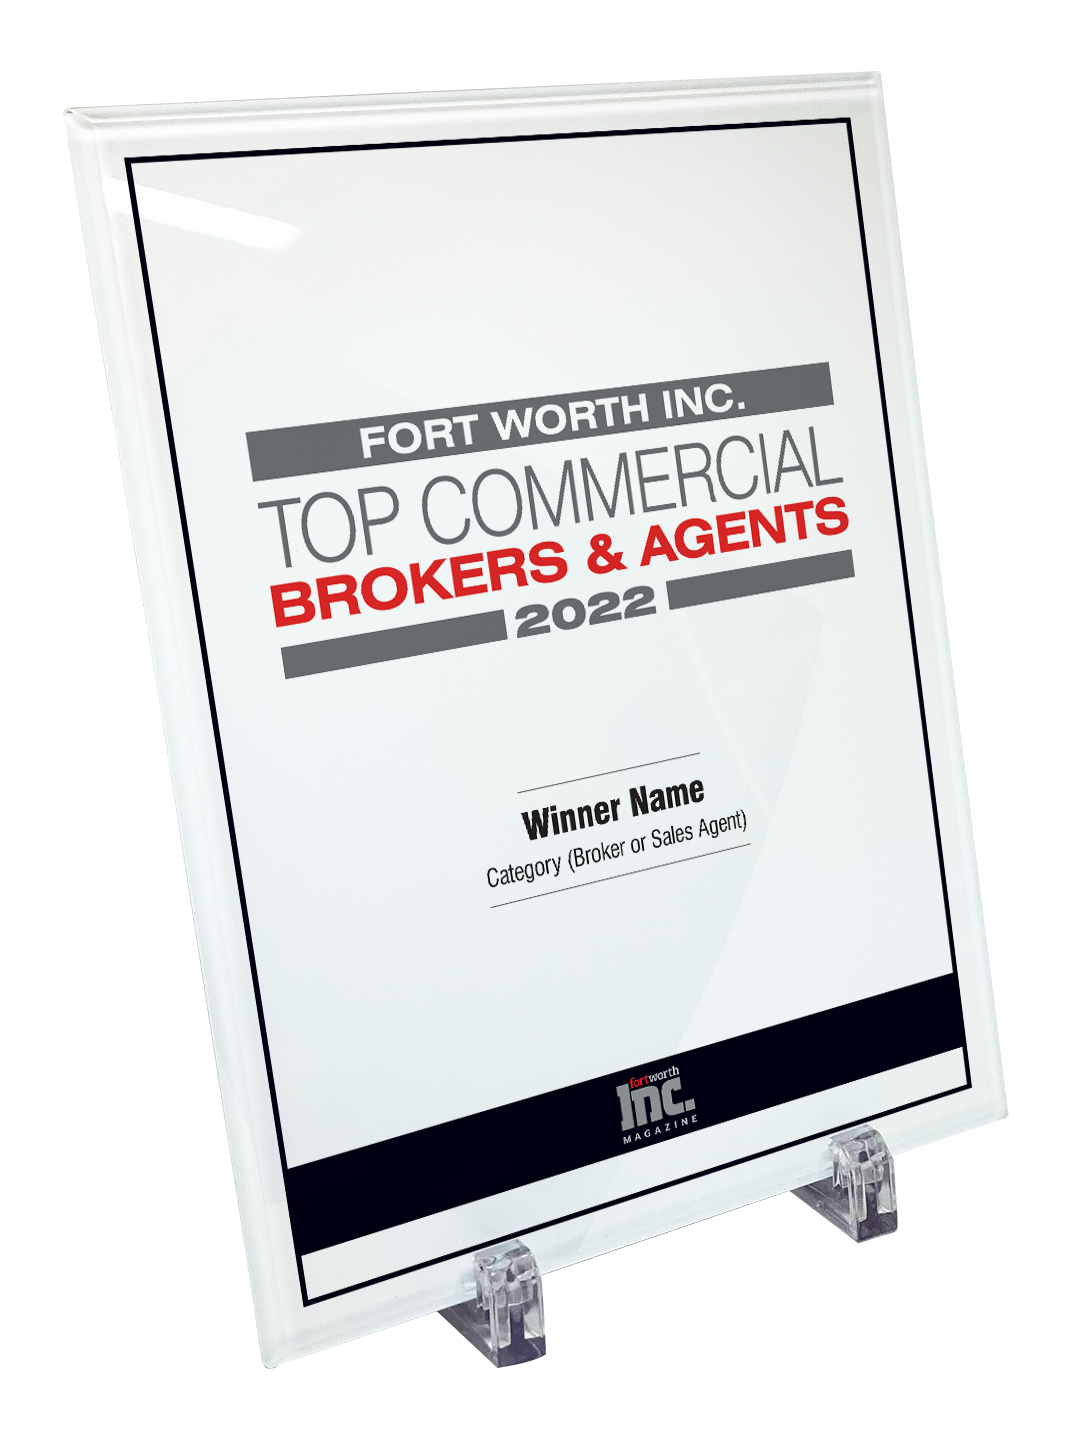 Fort Worth Inc. Top Commercial Brokers & Agents Award Crystal Plaque